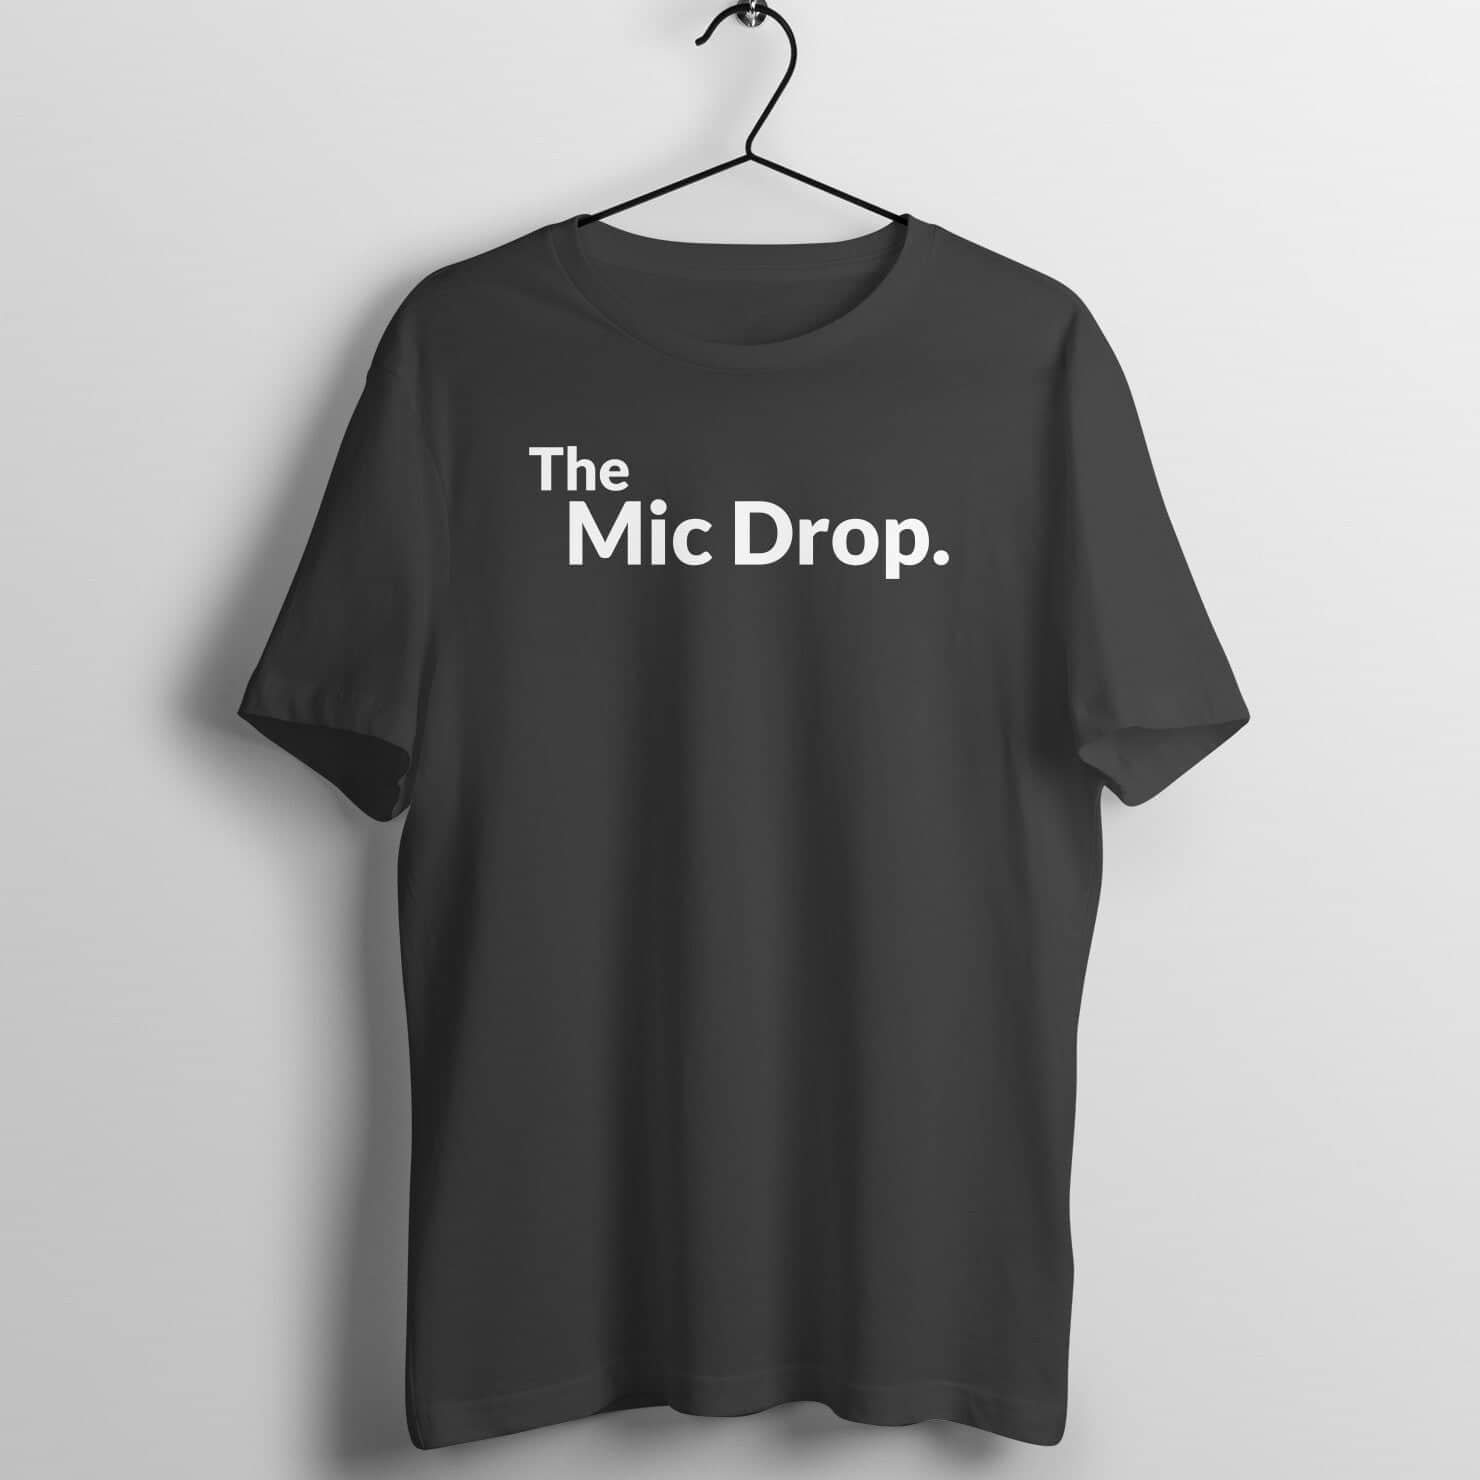 The Mic Drop Exclusive Black T Shirt for Men and Women Printrove Black S 